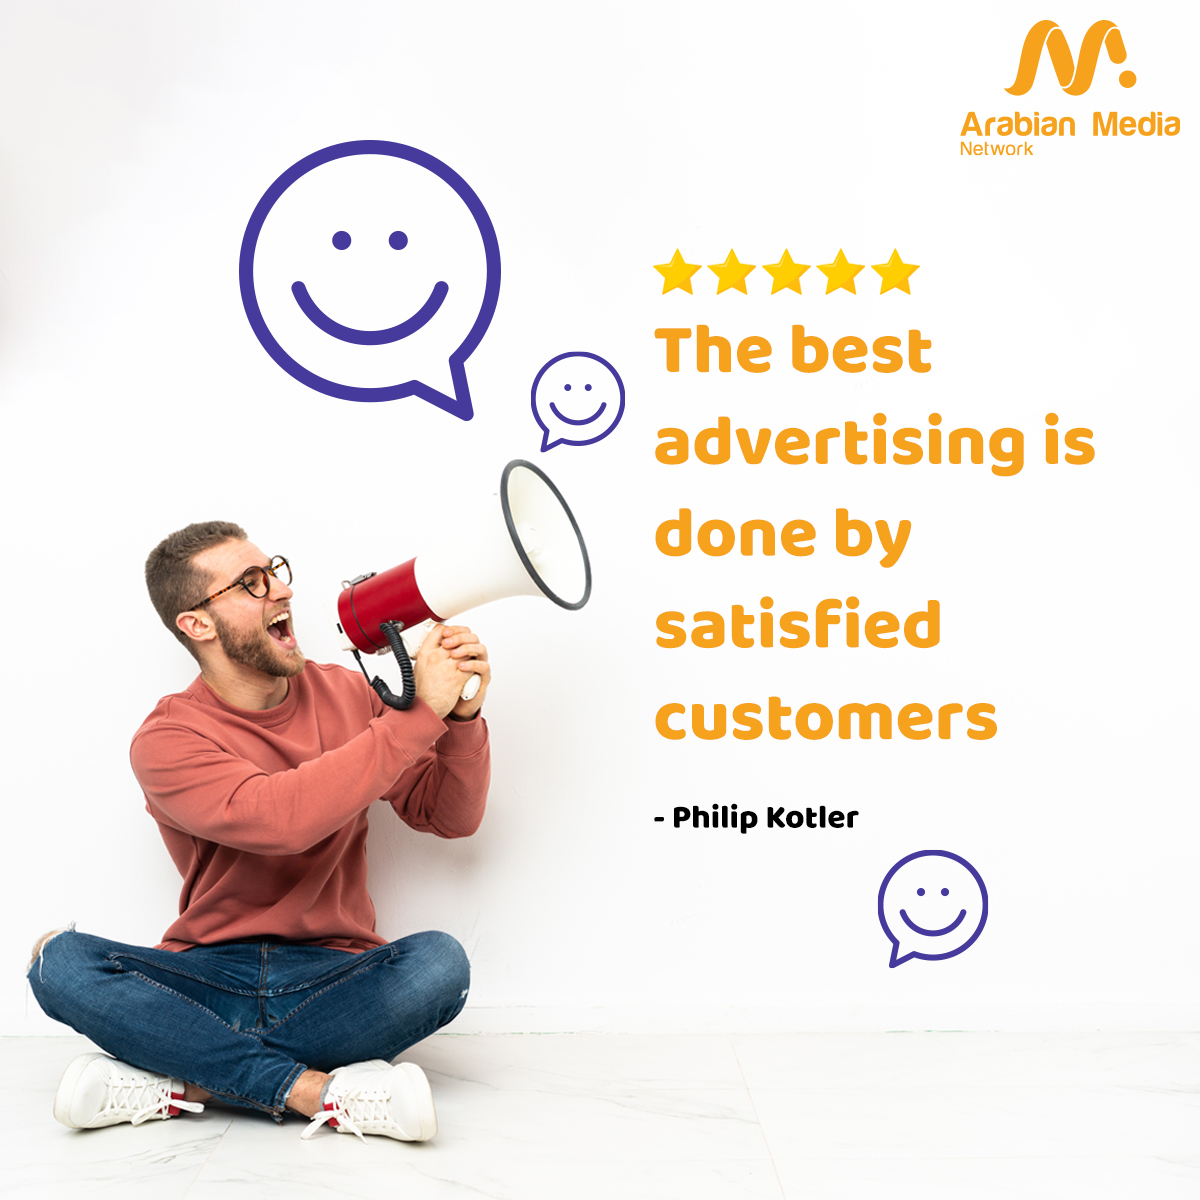 Join Arabian media network on a marketing journey where authenticity and value take center stage! 🌟💡

#AuthenticMarketing #BeyondAdvertising #FeelTheDifference #OOH #Outdooradvertising #Advertising #AMN #ArabianMediaNetwork